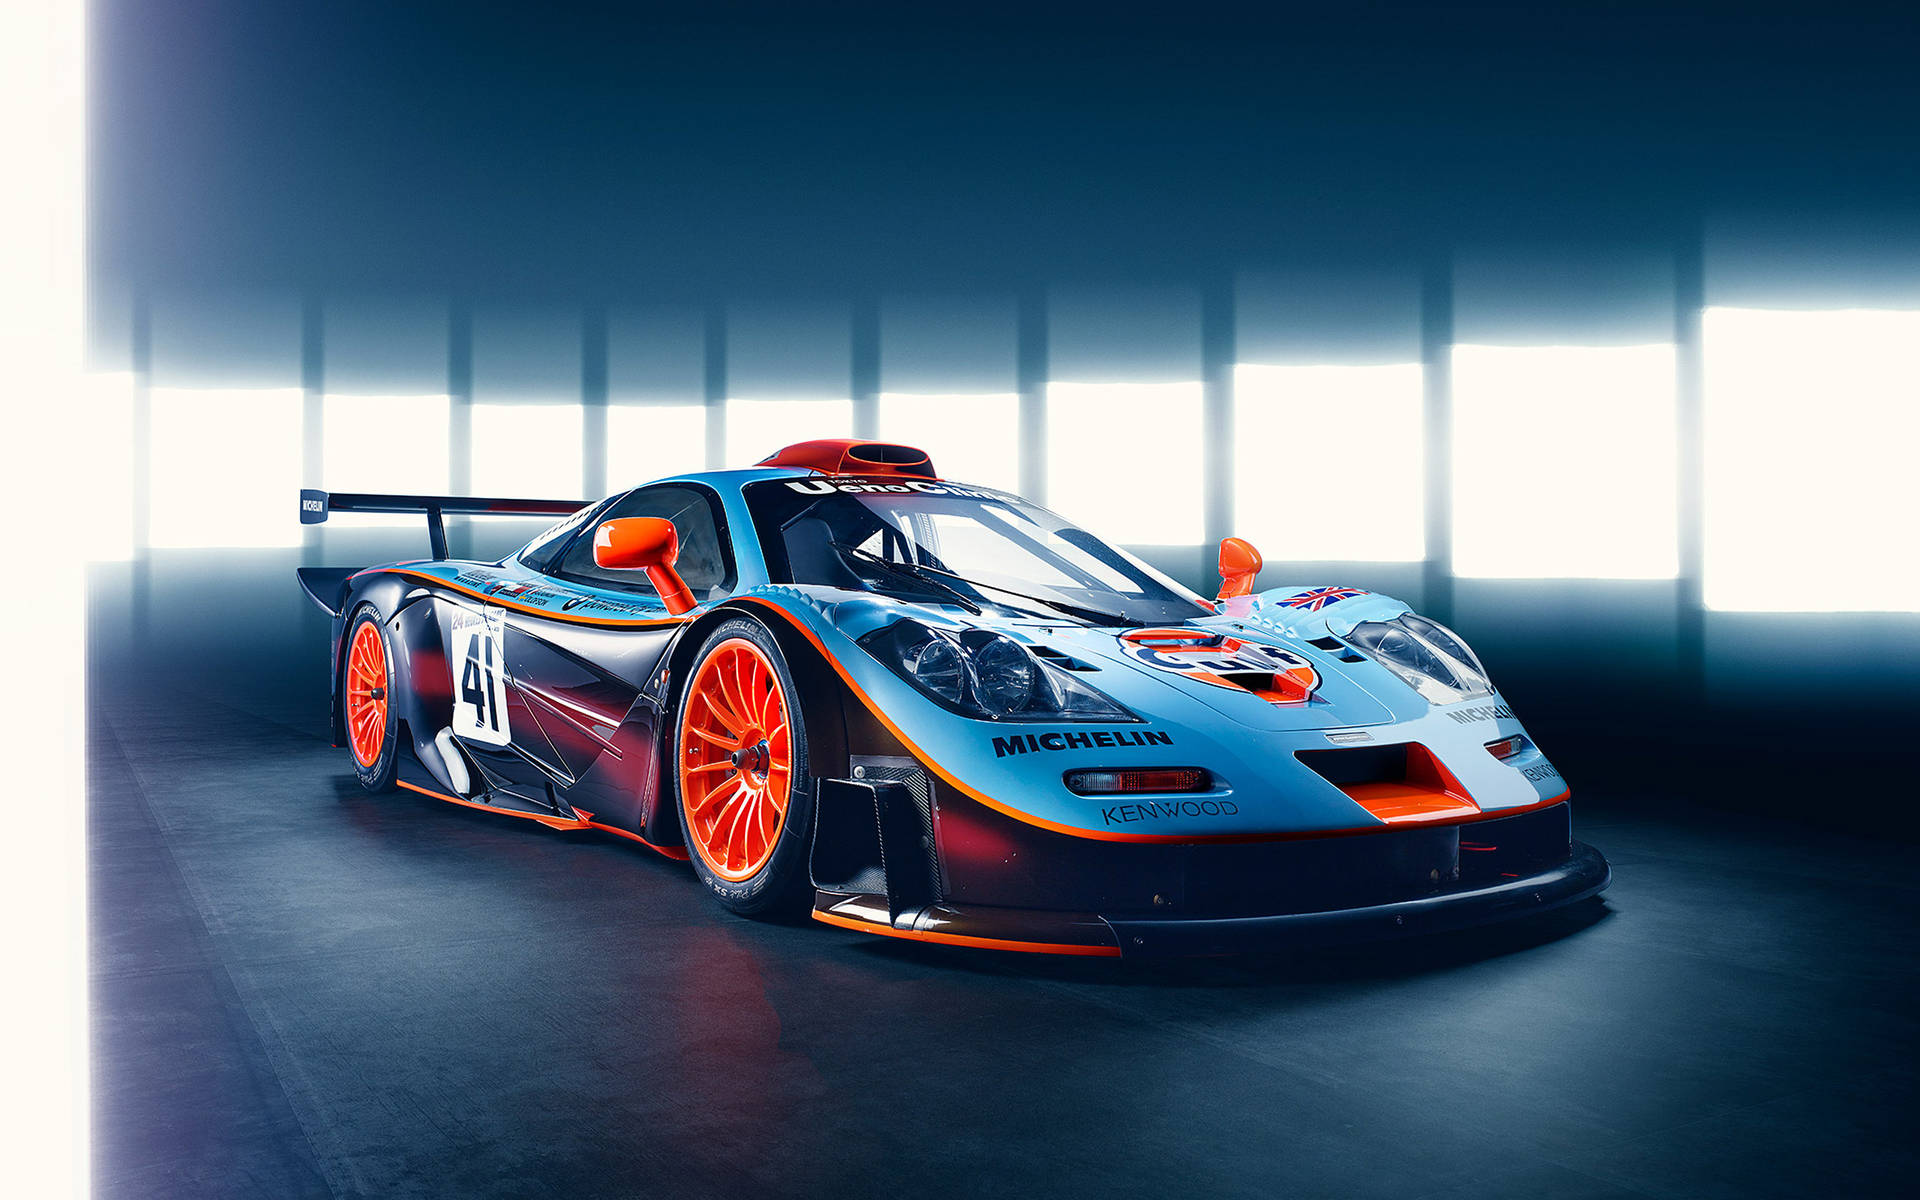 A Racing Car In A Dark Room Background